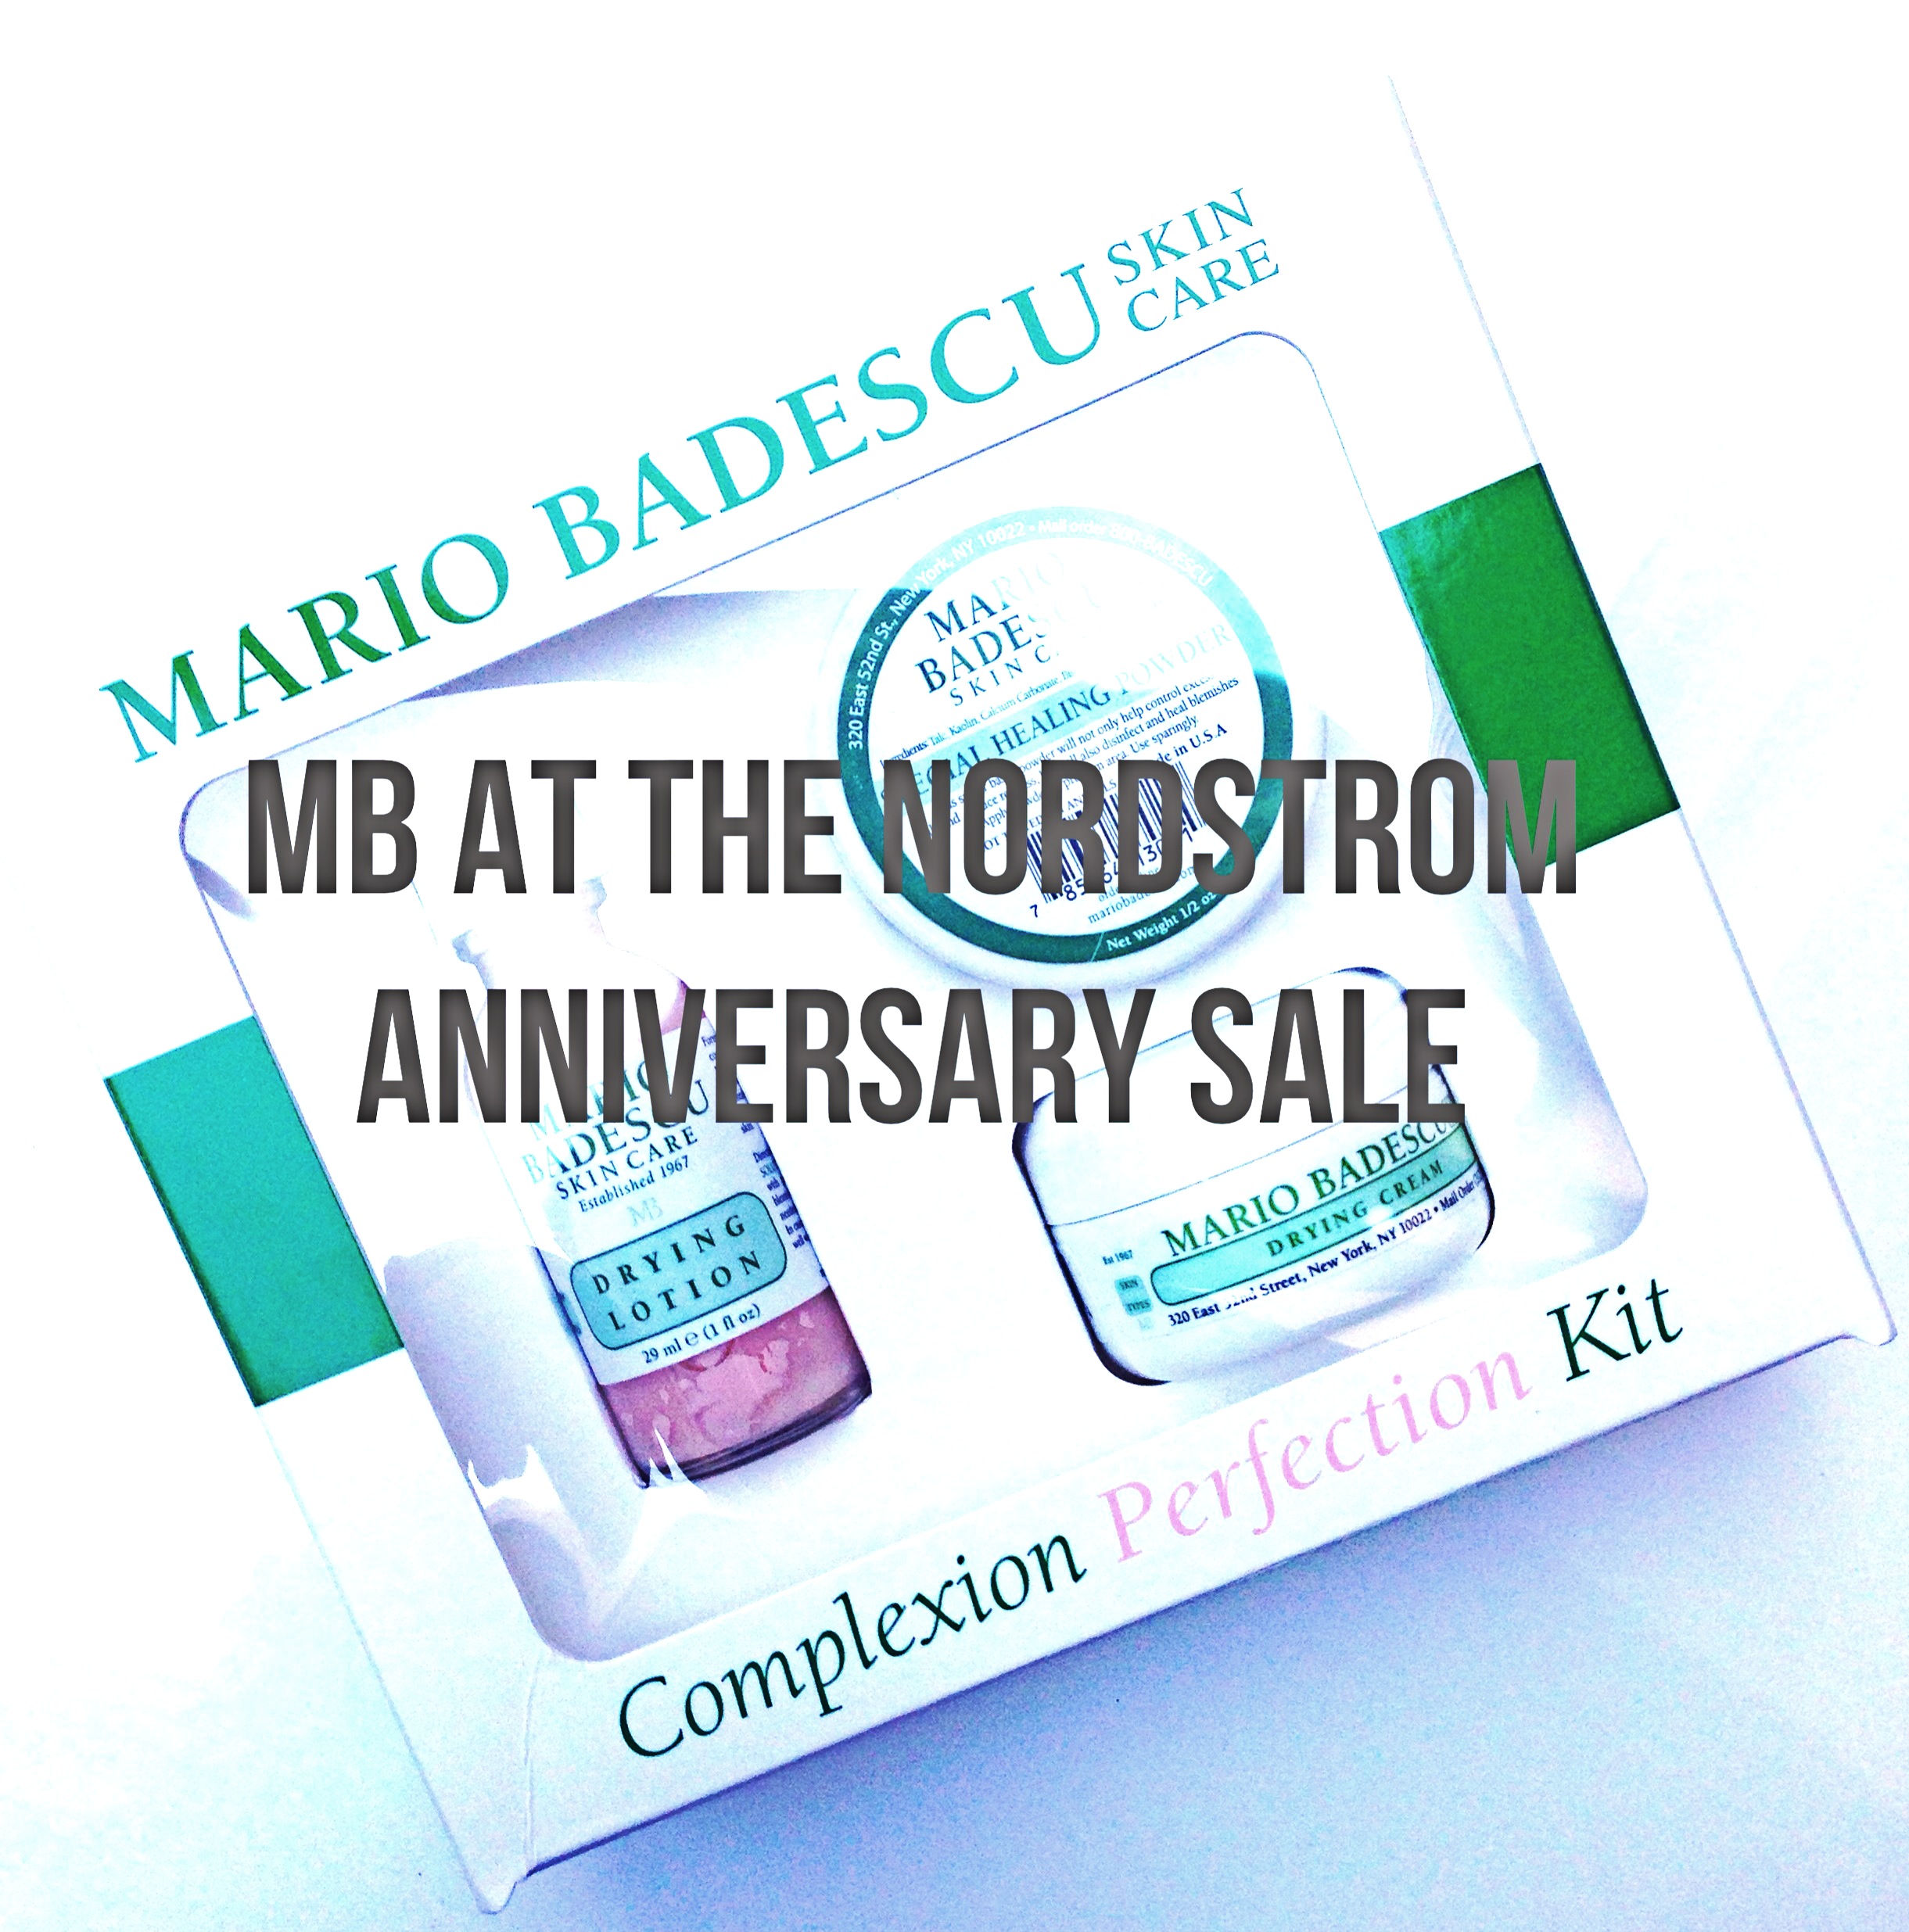 nordstrom-anniversary-sale-mario-badescu-complexion-perfection-kit